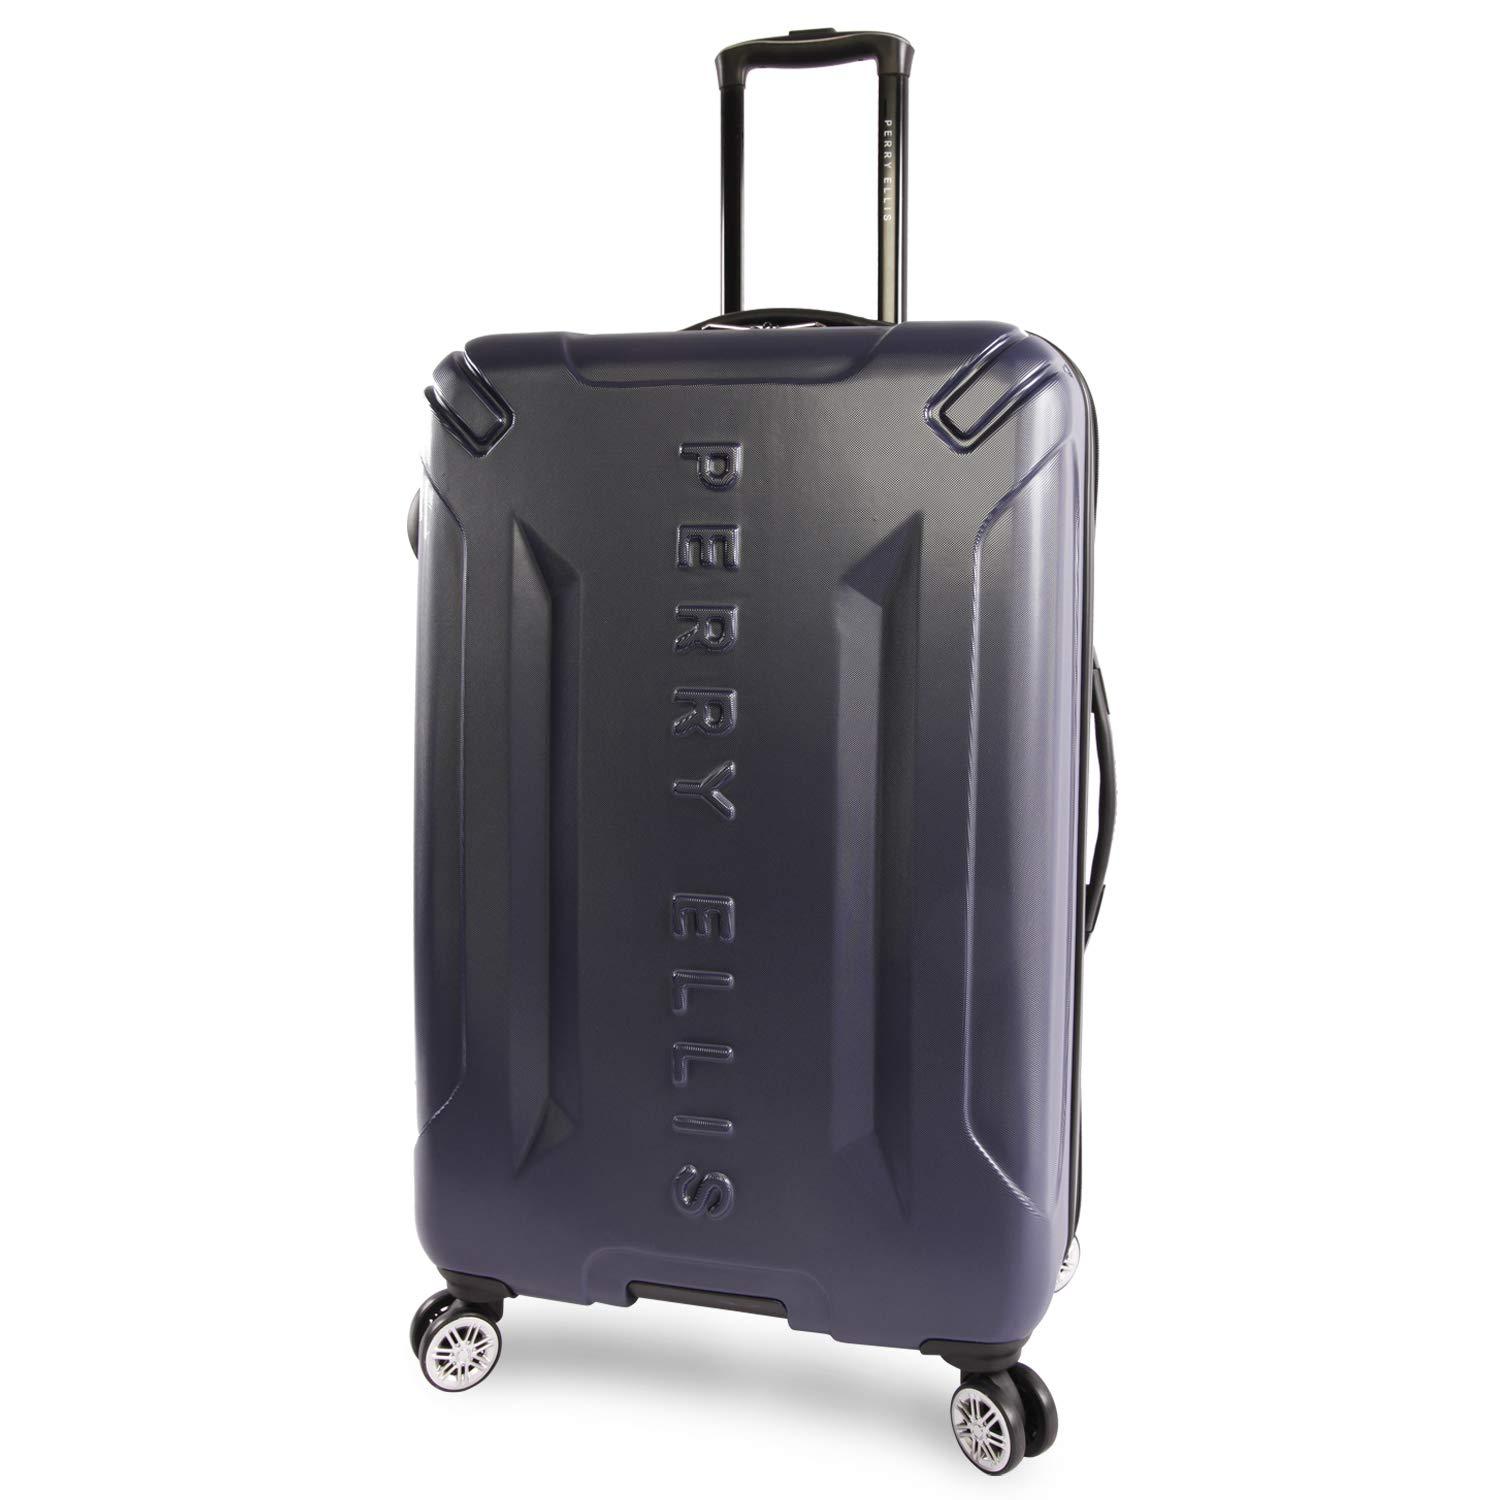 Black Perry Ellis Traction Hardside Spinner Check in Luggage 29 